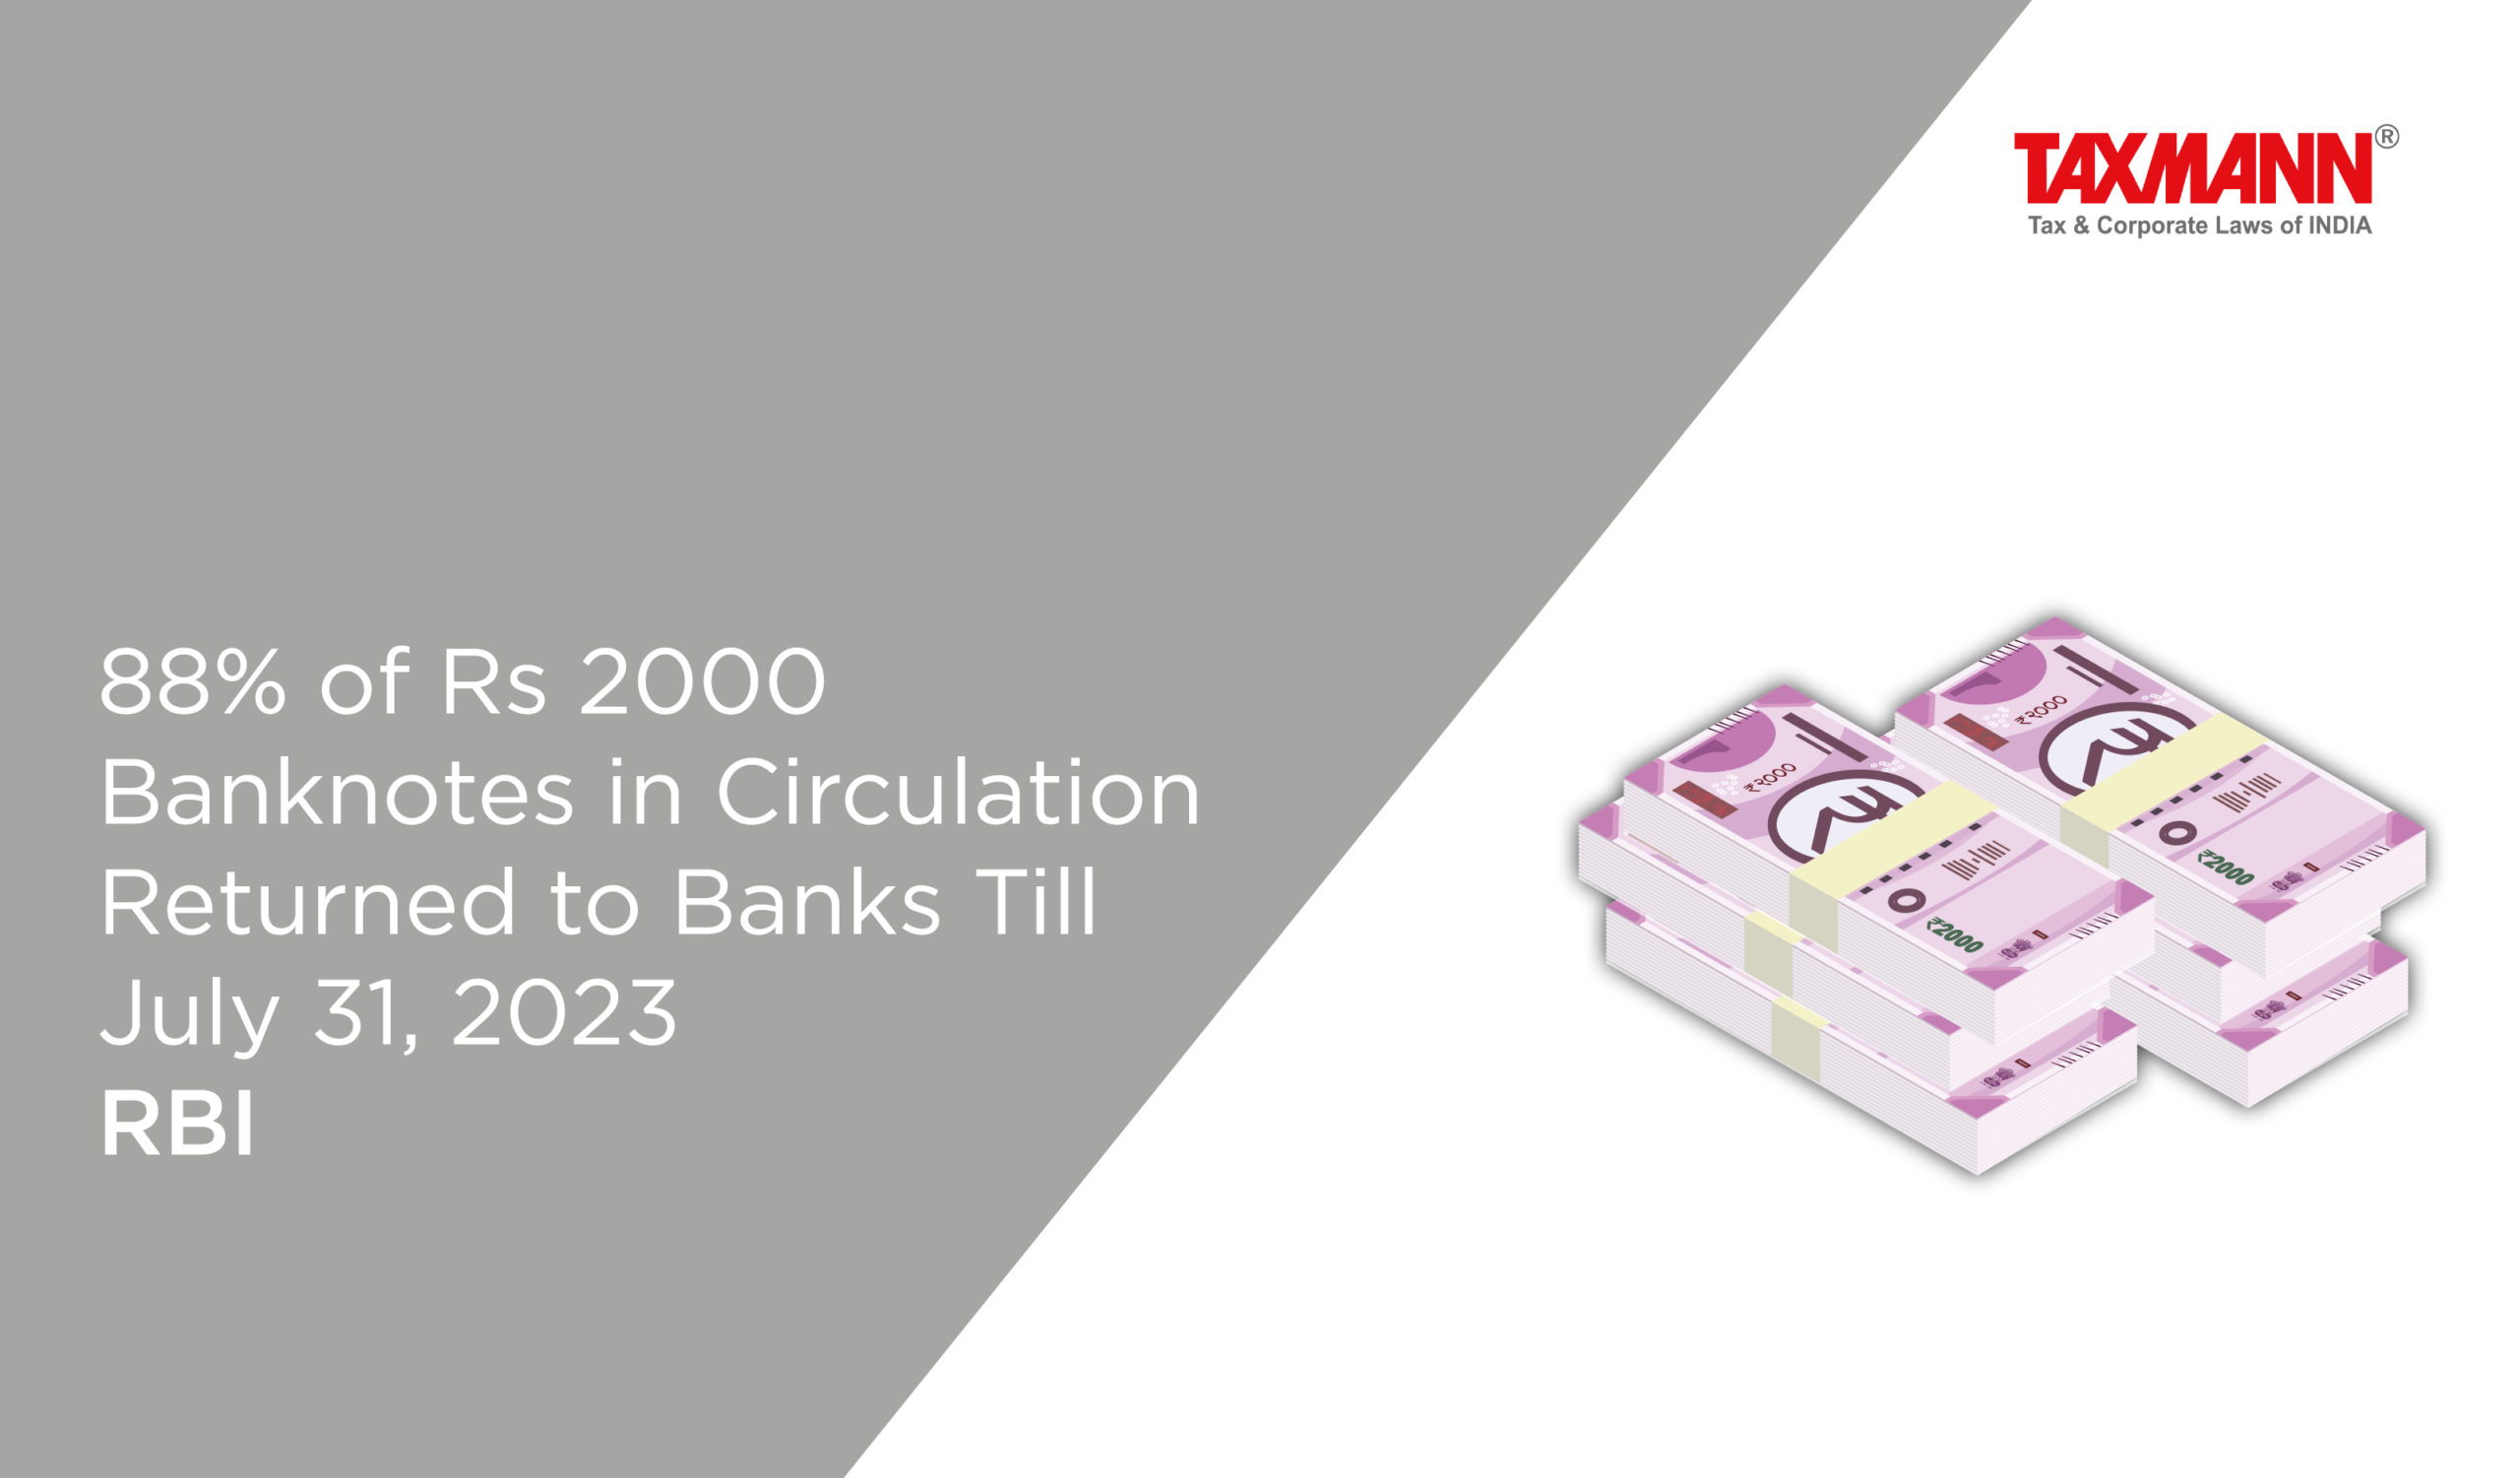 Rs 2000 banknotes in circulation